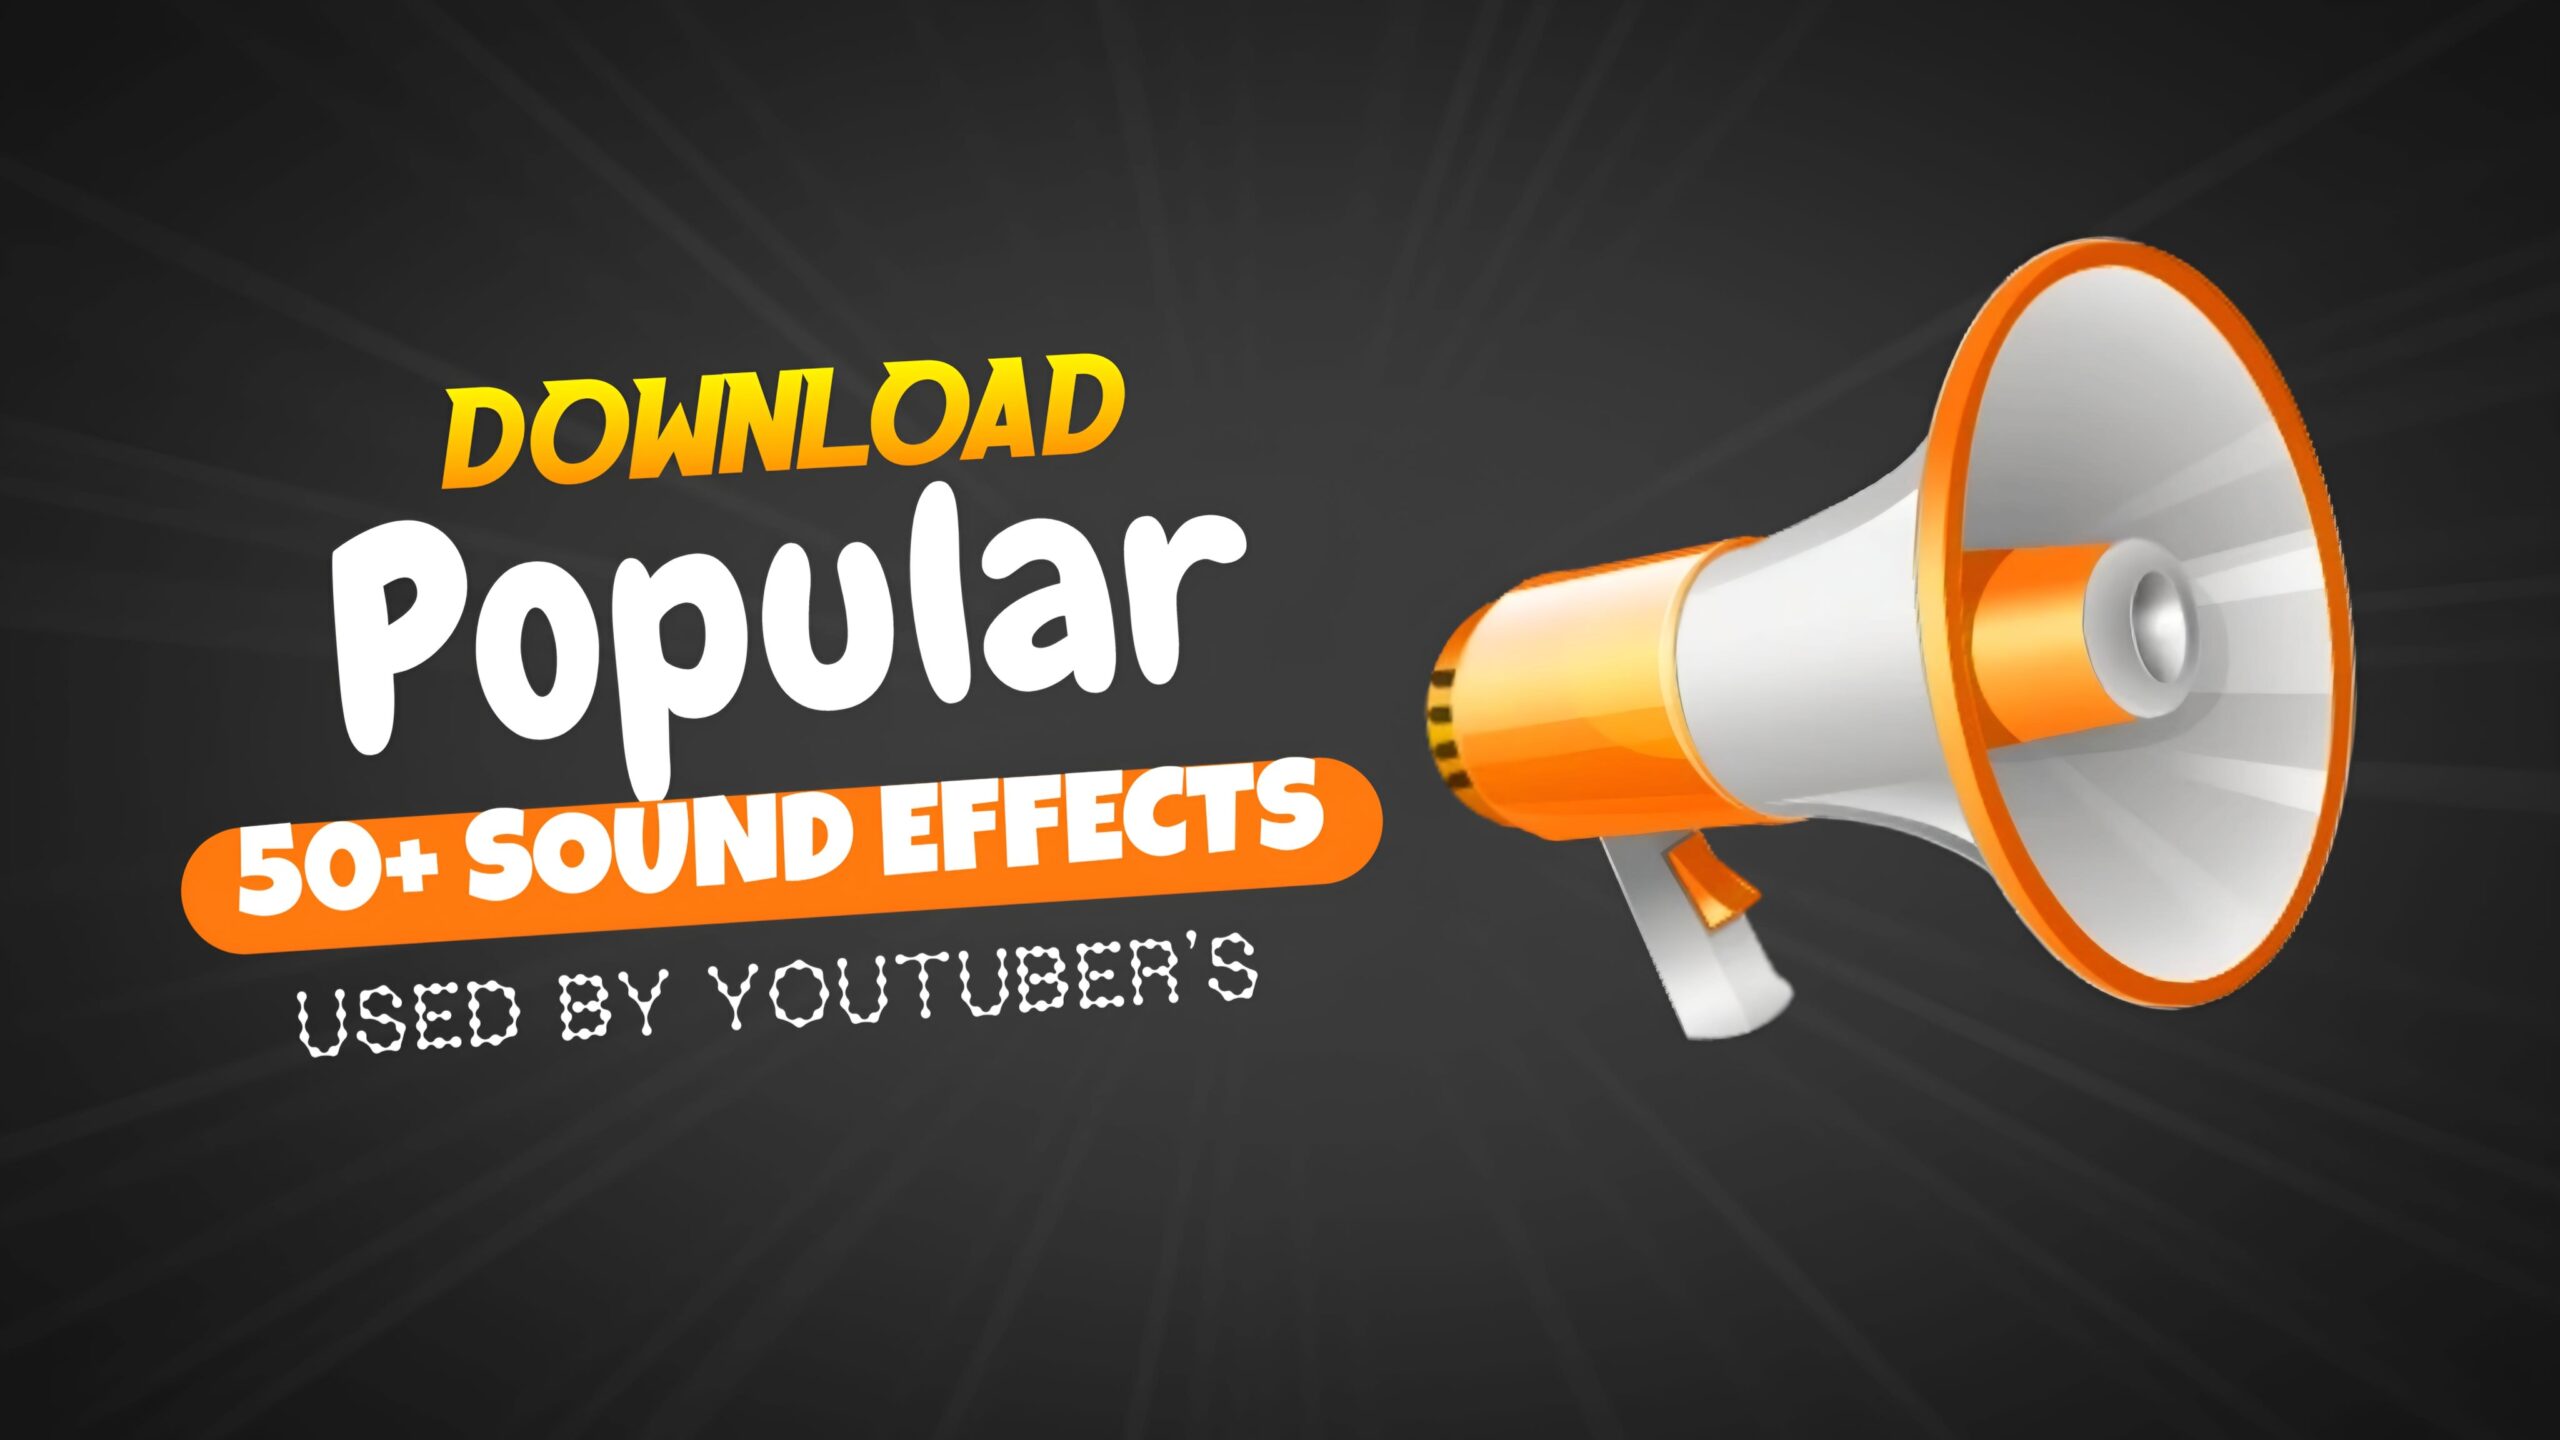 Download Popular Sound Effects for Editing